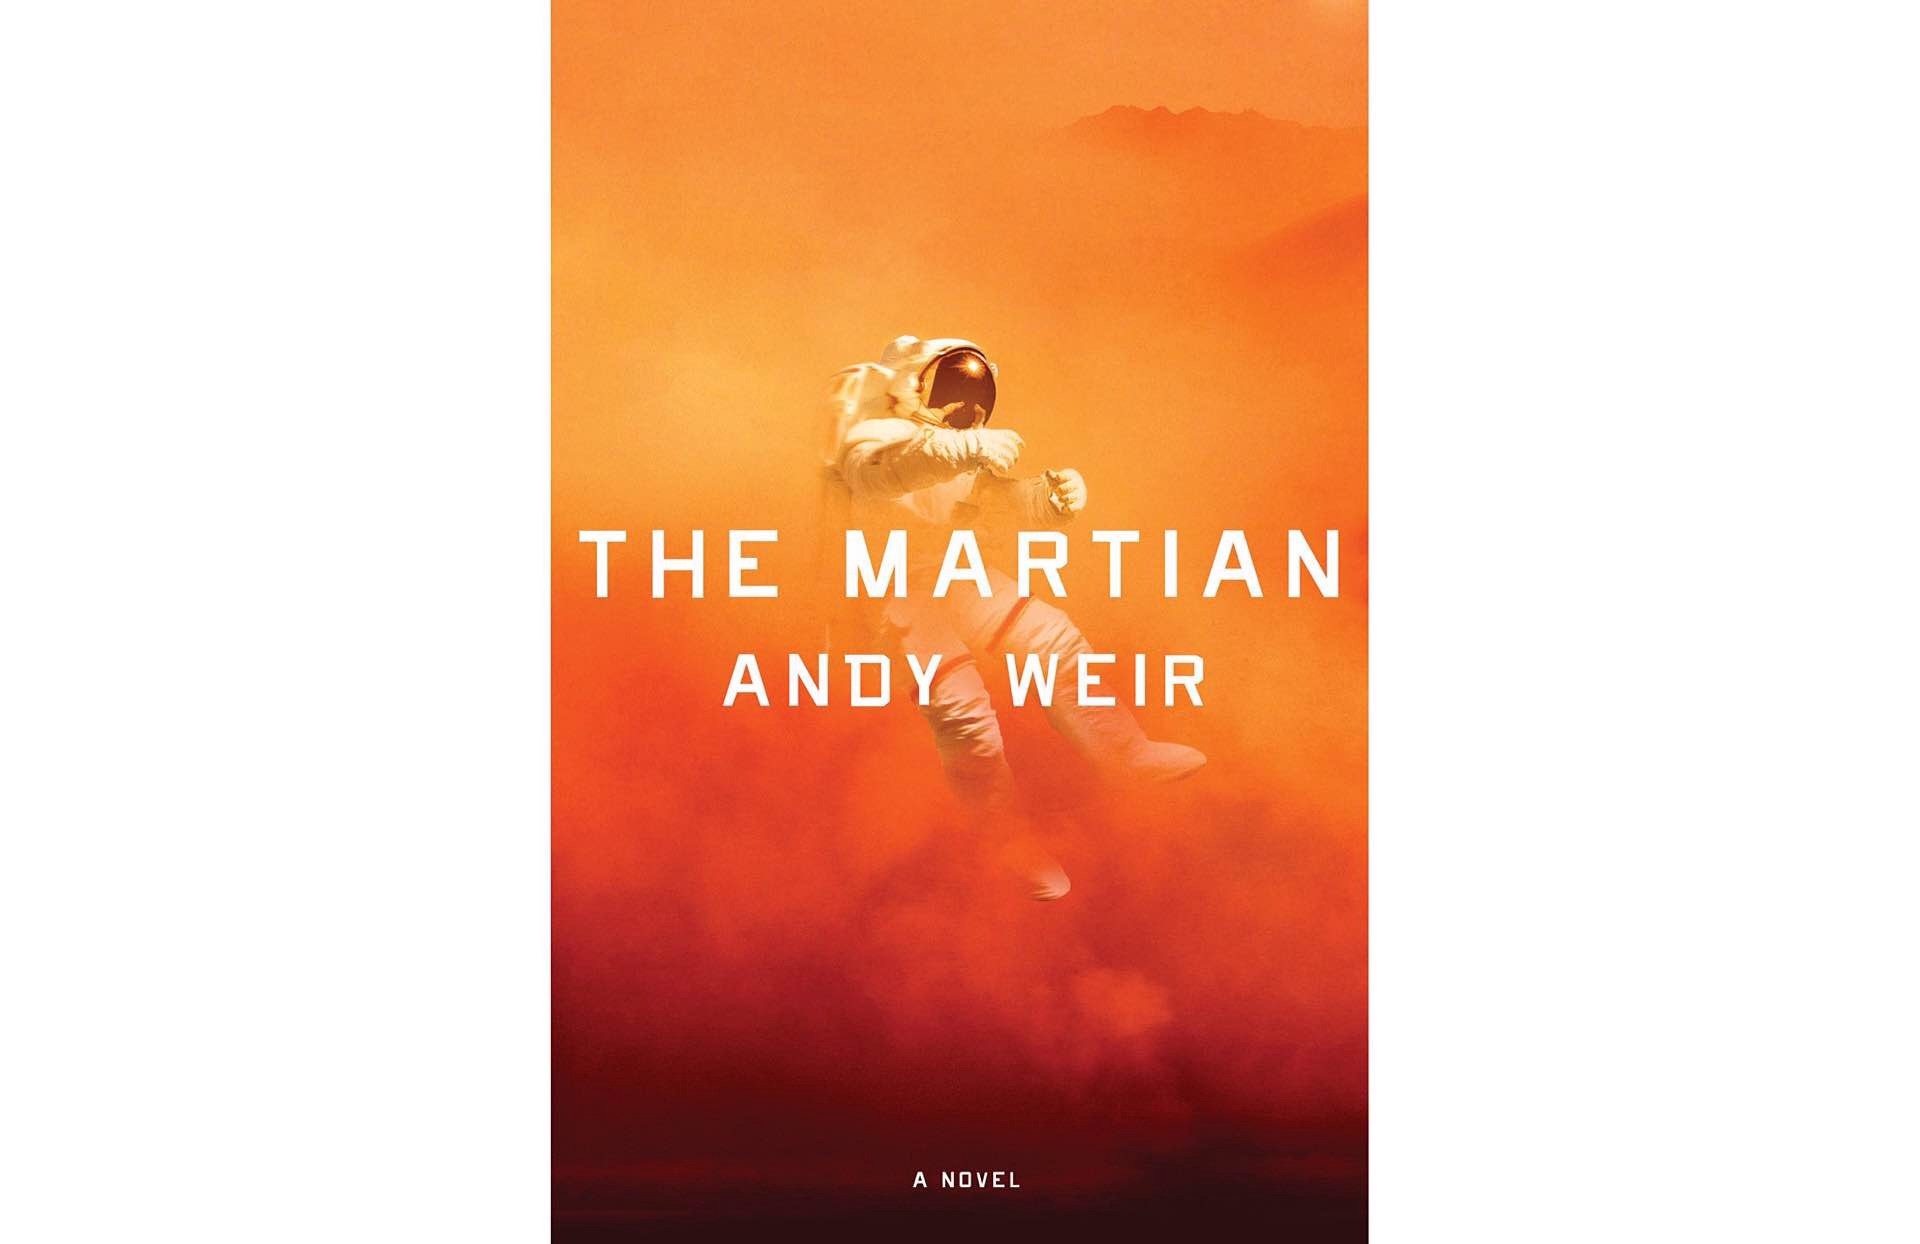 The Martian by Andy Weir. $3 on the Kindle Store, $9 for paperback, and $16 for hardcover.